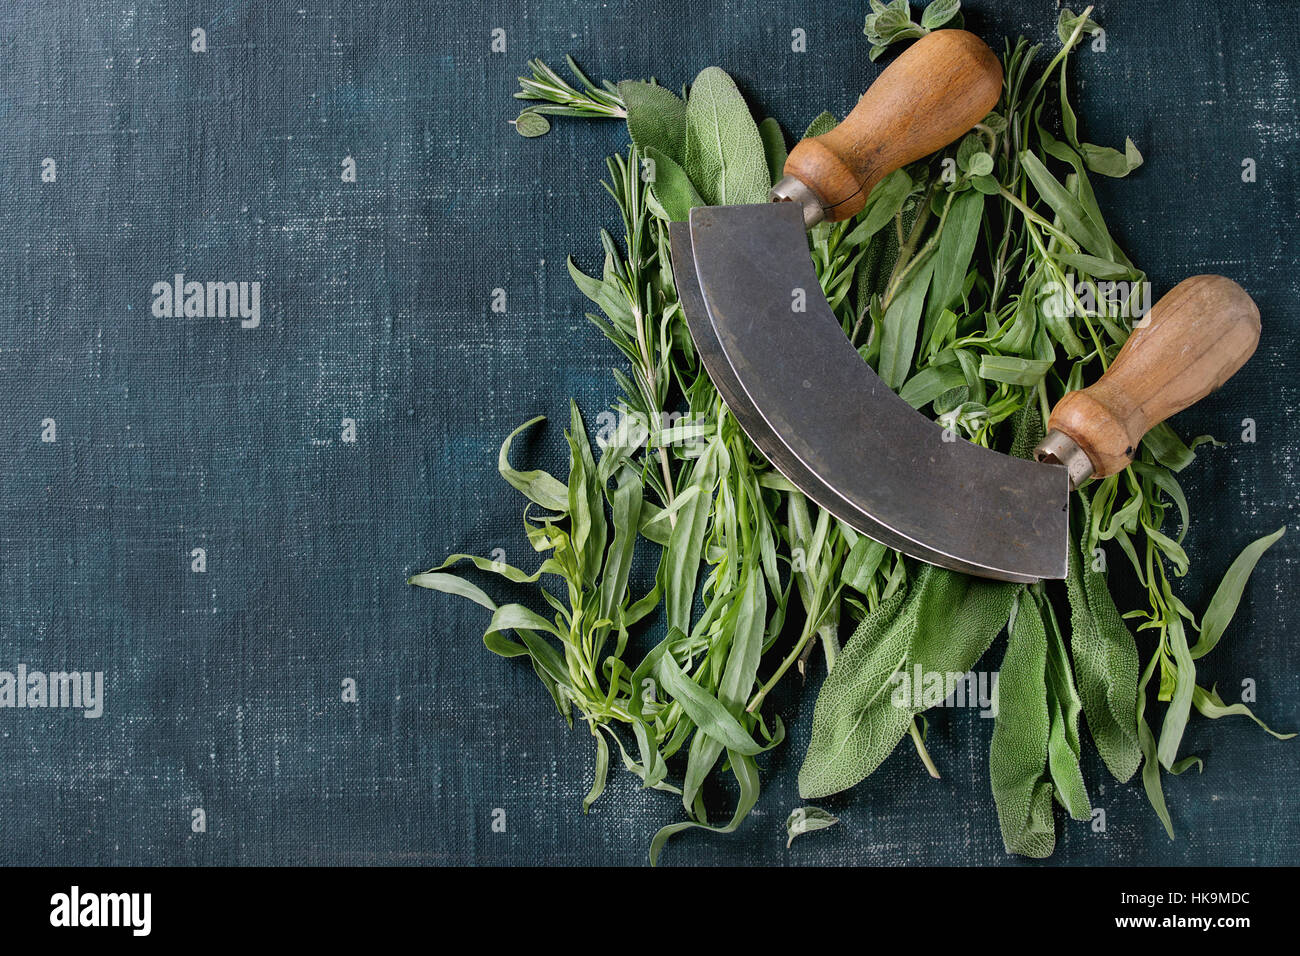 Bundle of fresh Italian herbs rosemary, oregano and sage with vintage herb cutter over dark blue shabby background. Top view with copy space Stock Photo